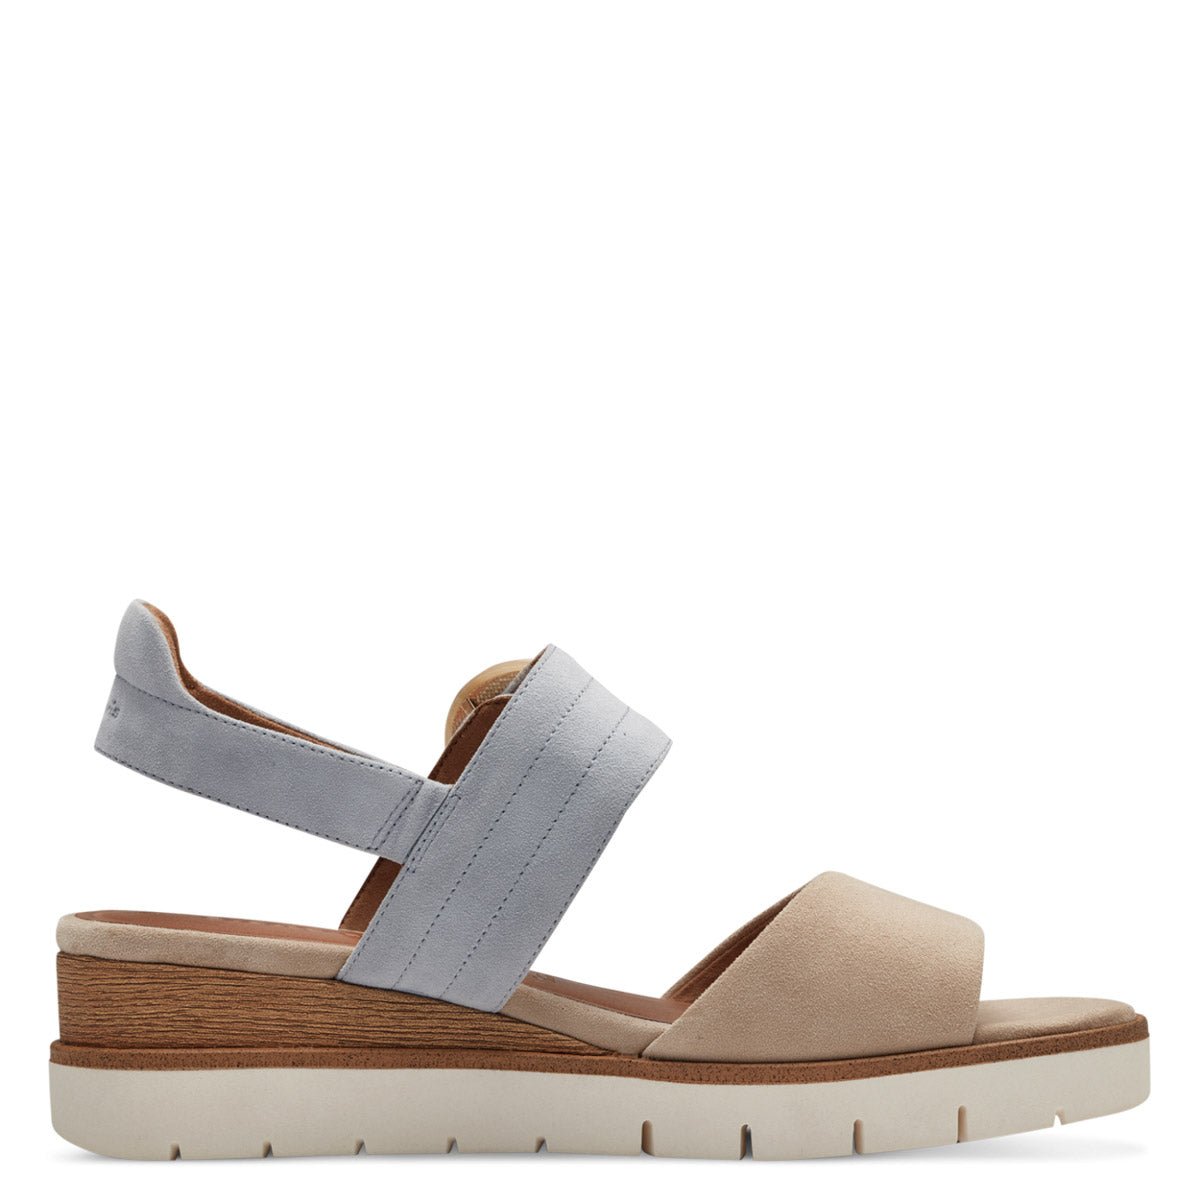 Tamaris Beige and Dusty Blue Leather Wedge Sandals